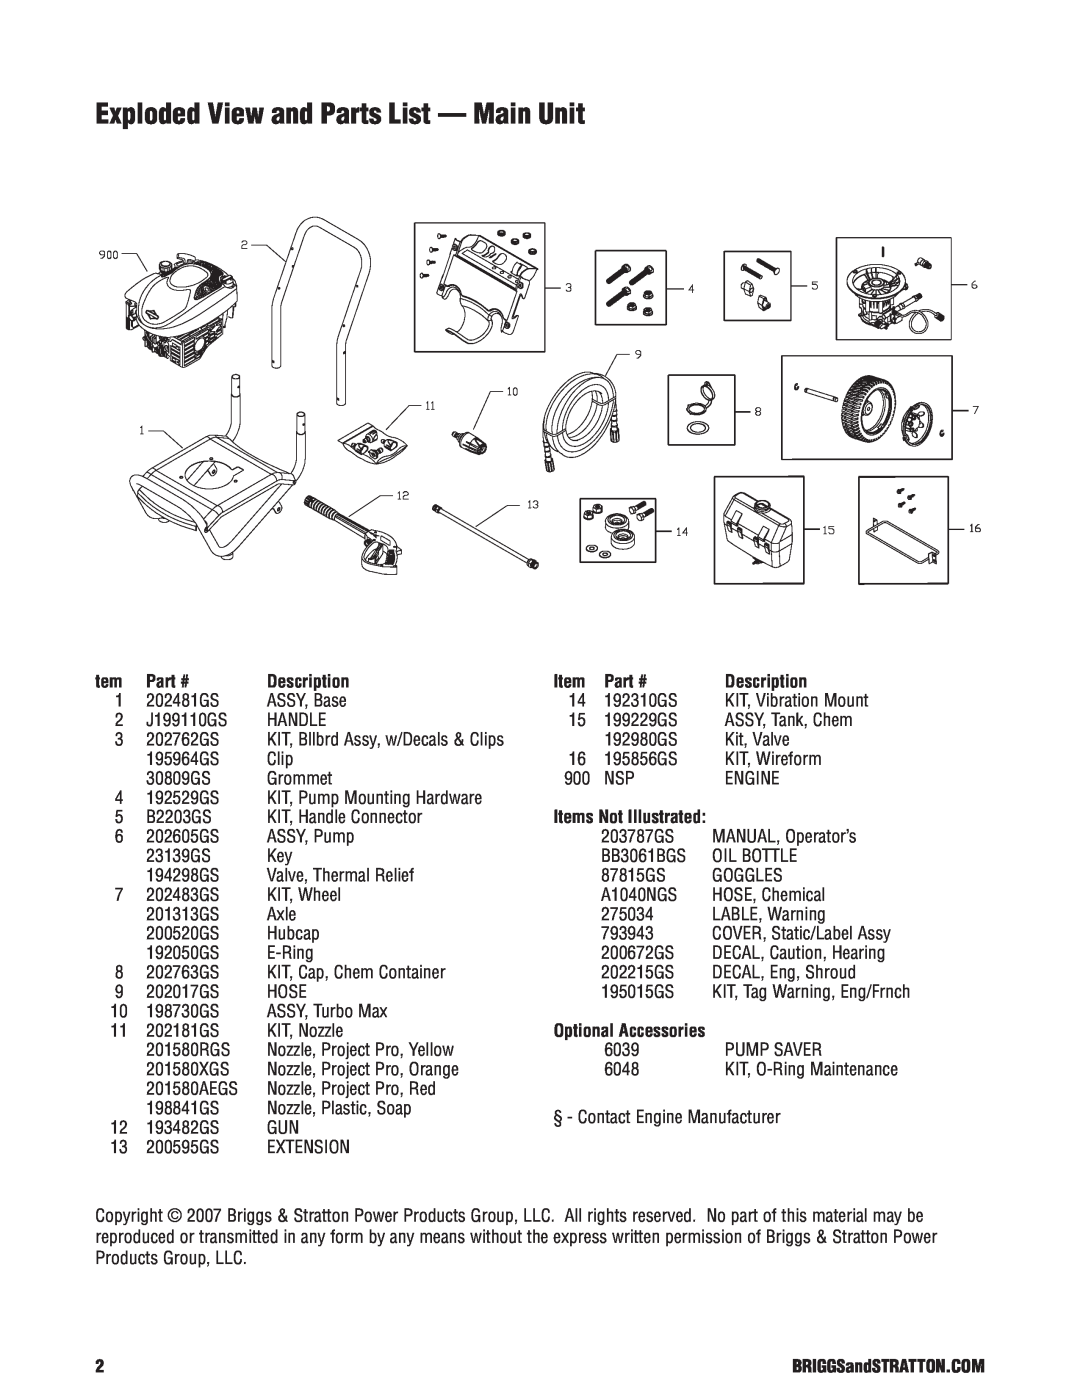 Briggs & Stratton 20306 manual Exploded View and Parts List — Main Unit, Description 